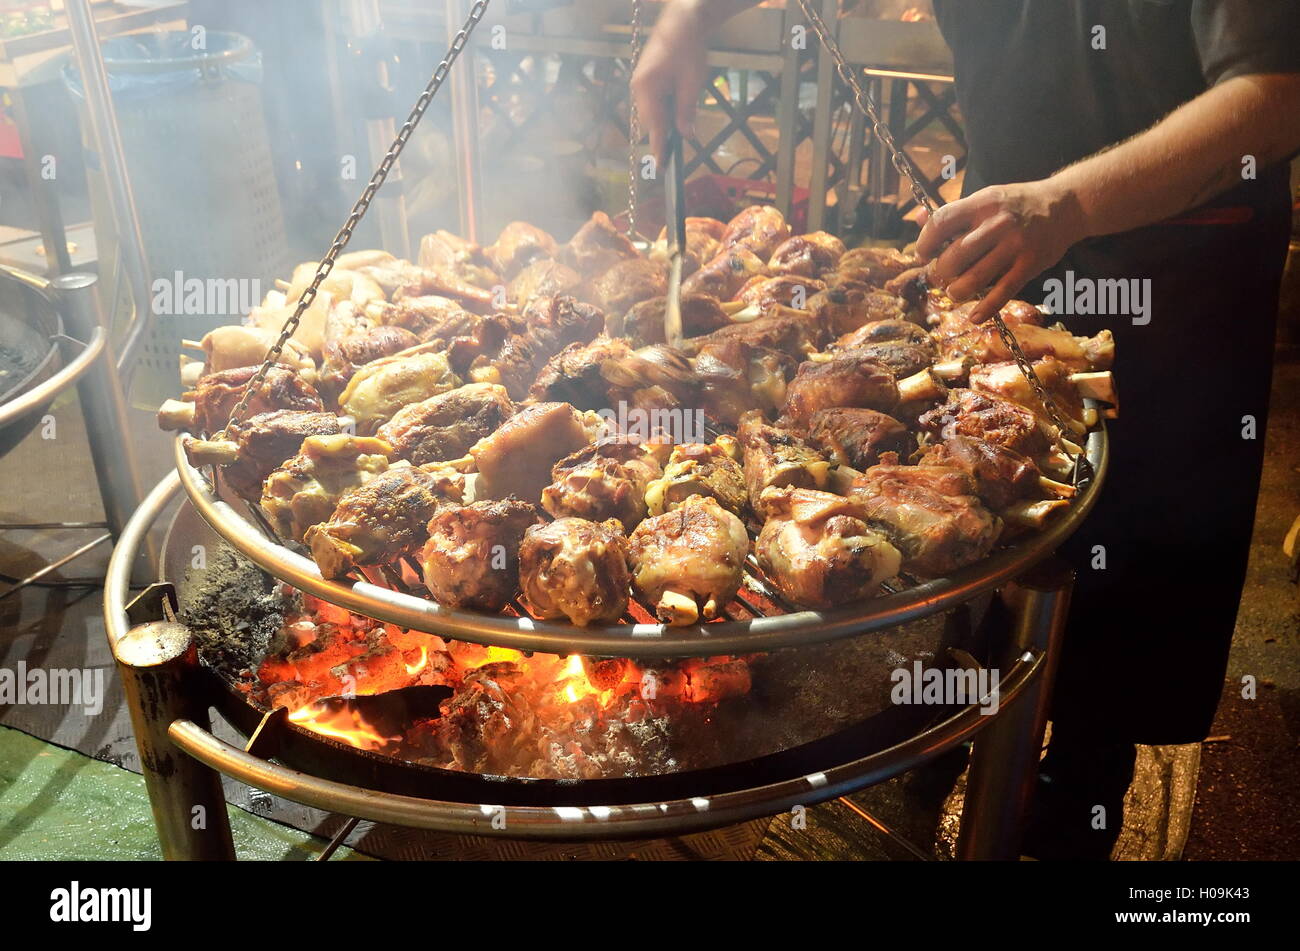 grilled meat cooked over a slow fire Stock Photo